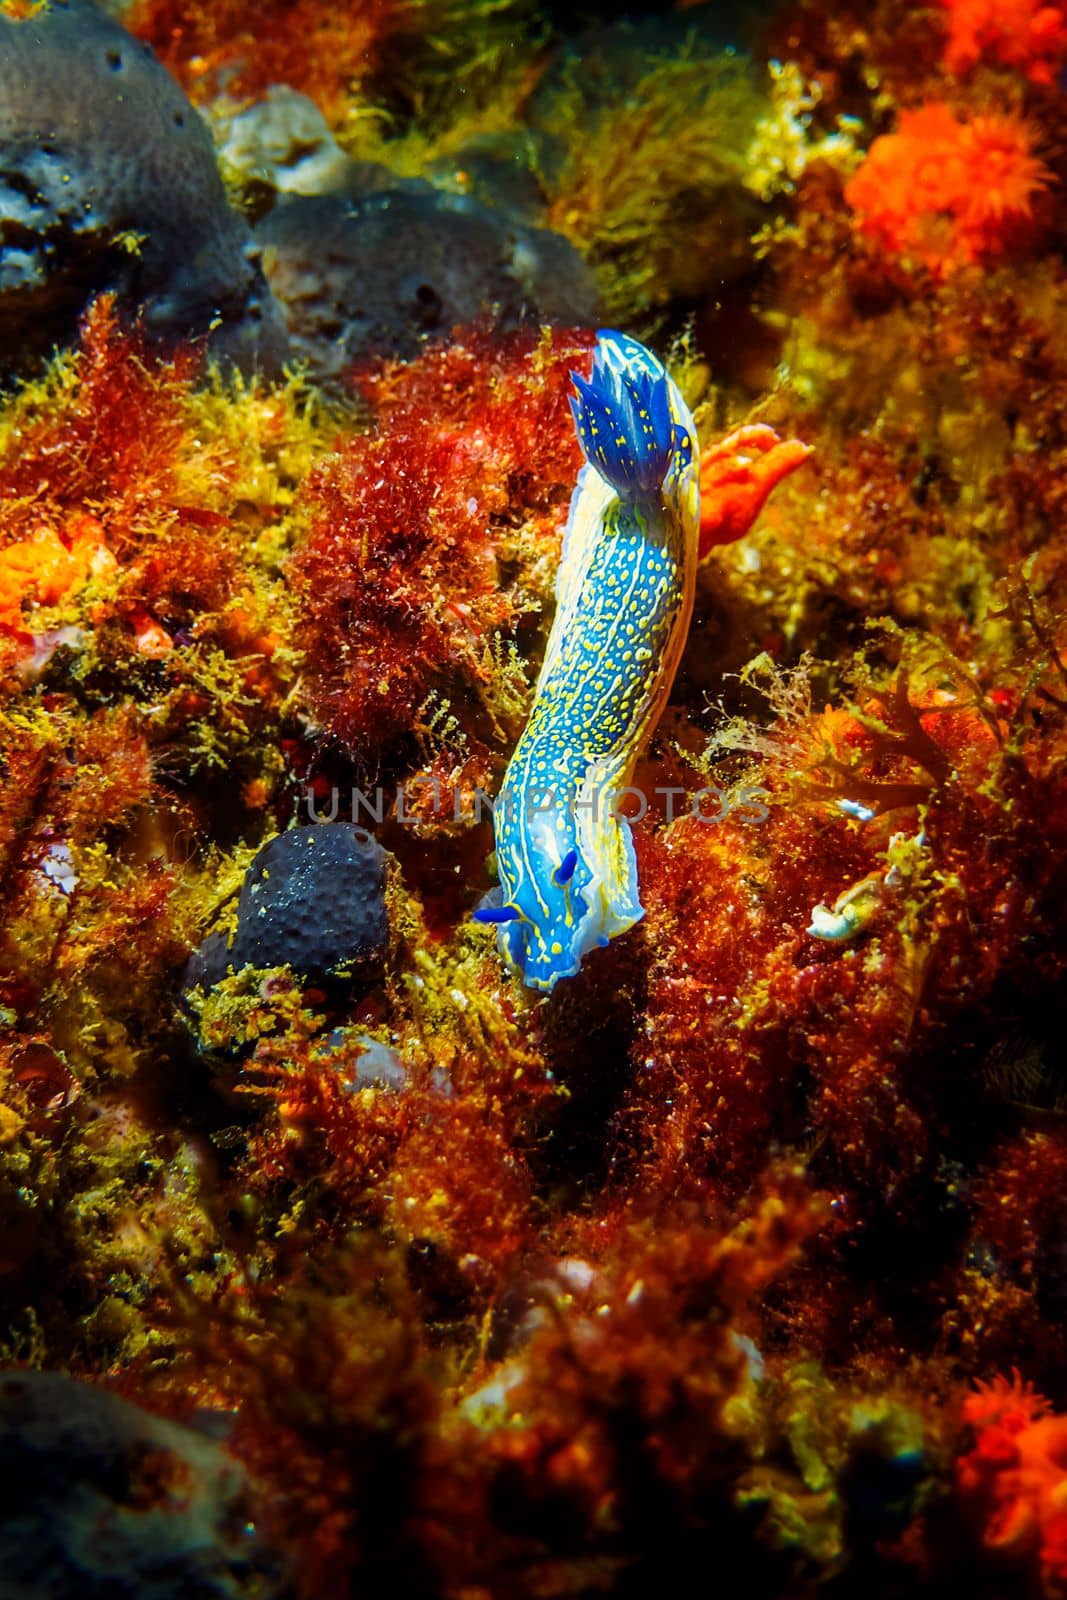 Blue and yellow nudibranch crawls across the seabed covered in green and red algae